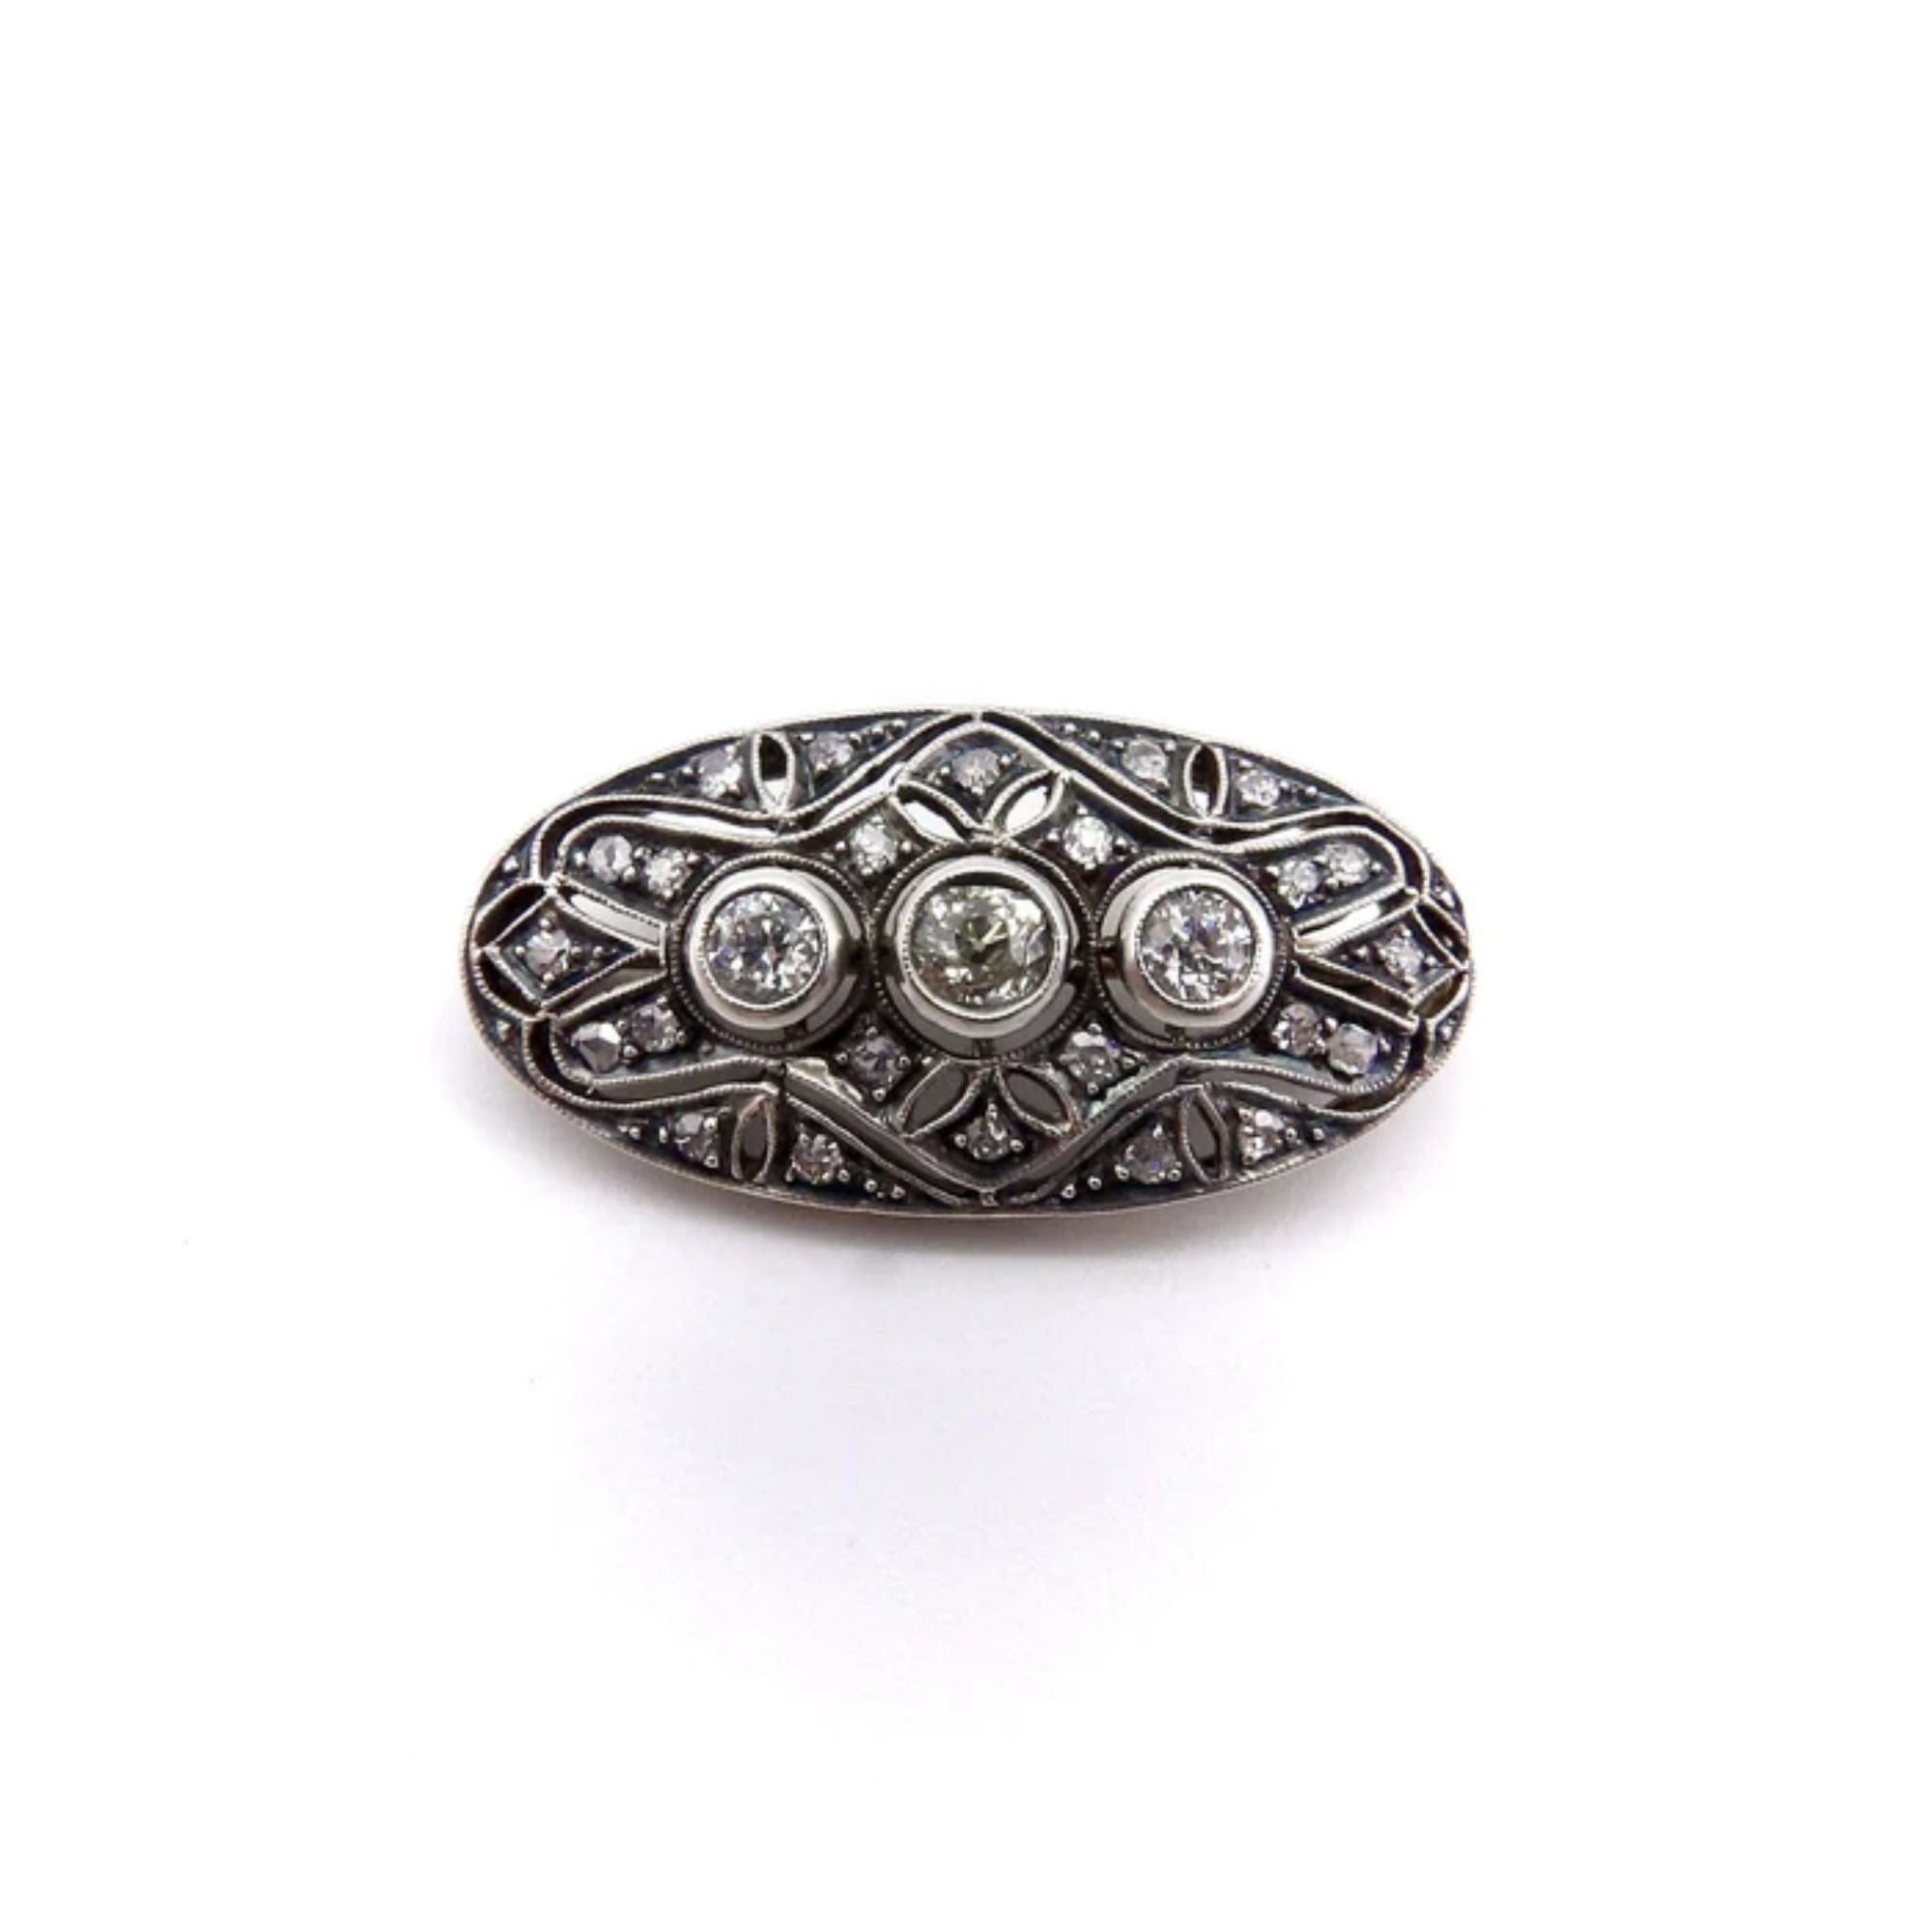 This Victorian-era brooch contains three Old Mine cut diamonds, surrounded by 24 smaller rose and single cut diamonds. The front of the brooch is made of silver; its tarnished patina creates a gorgeous chiaroscuro effect, highlighting the sparkling